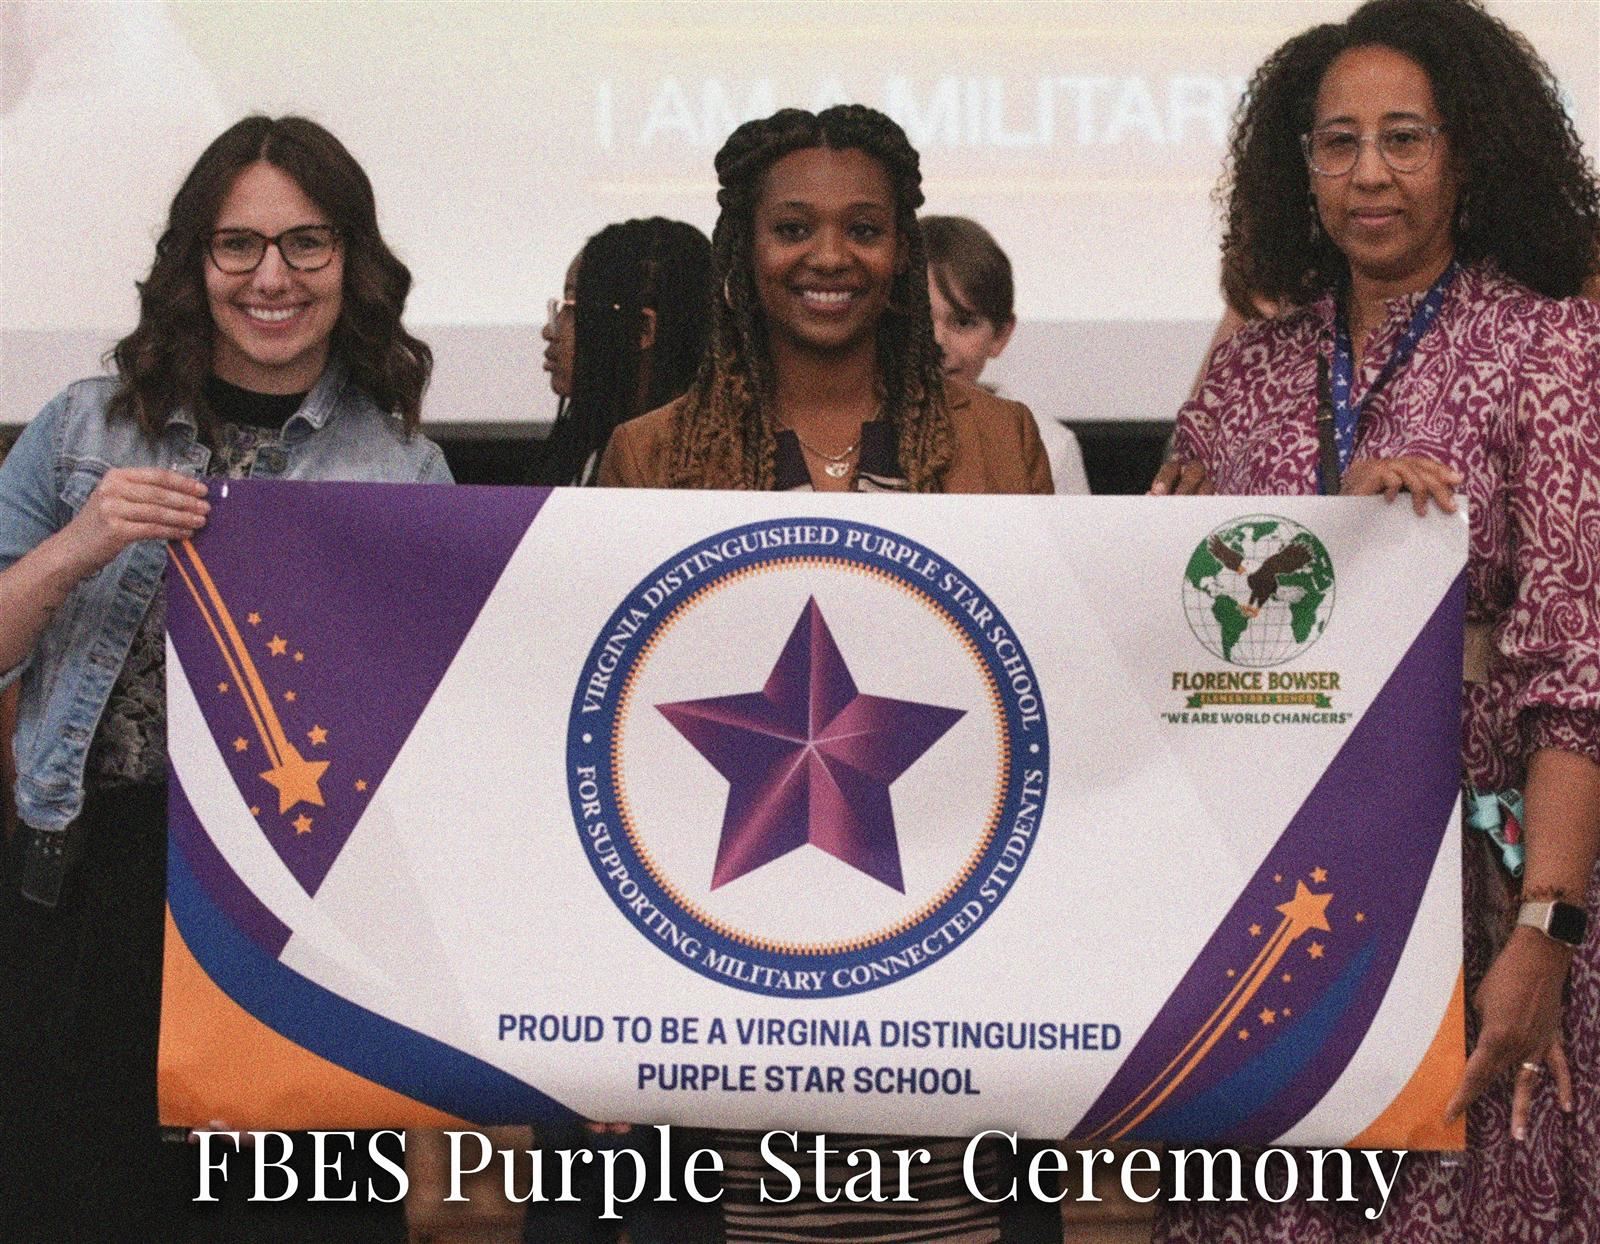  Florence Bowser Elementary School Purple Star Ceremony